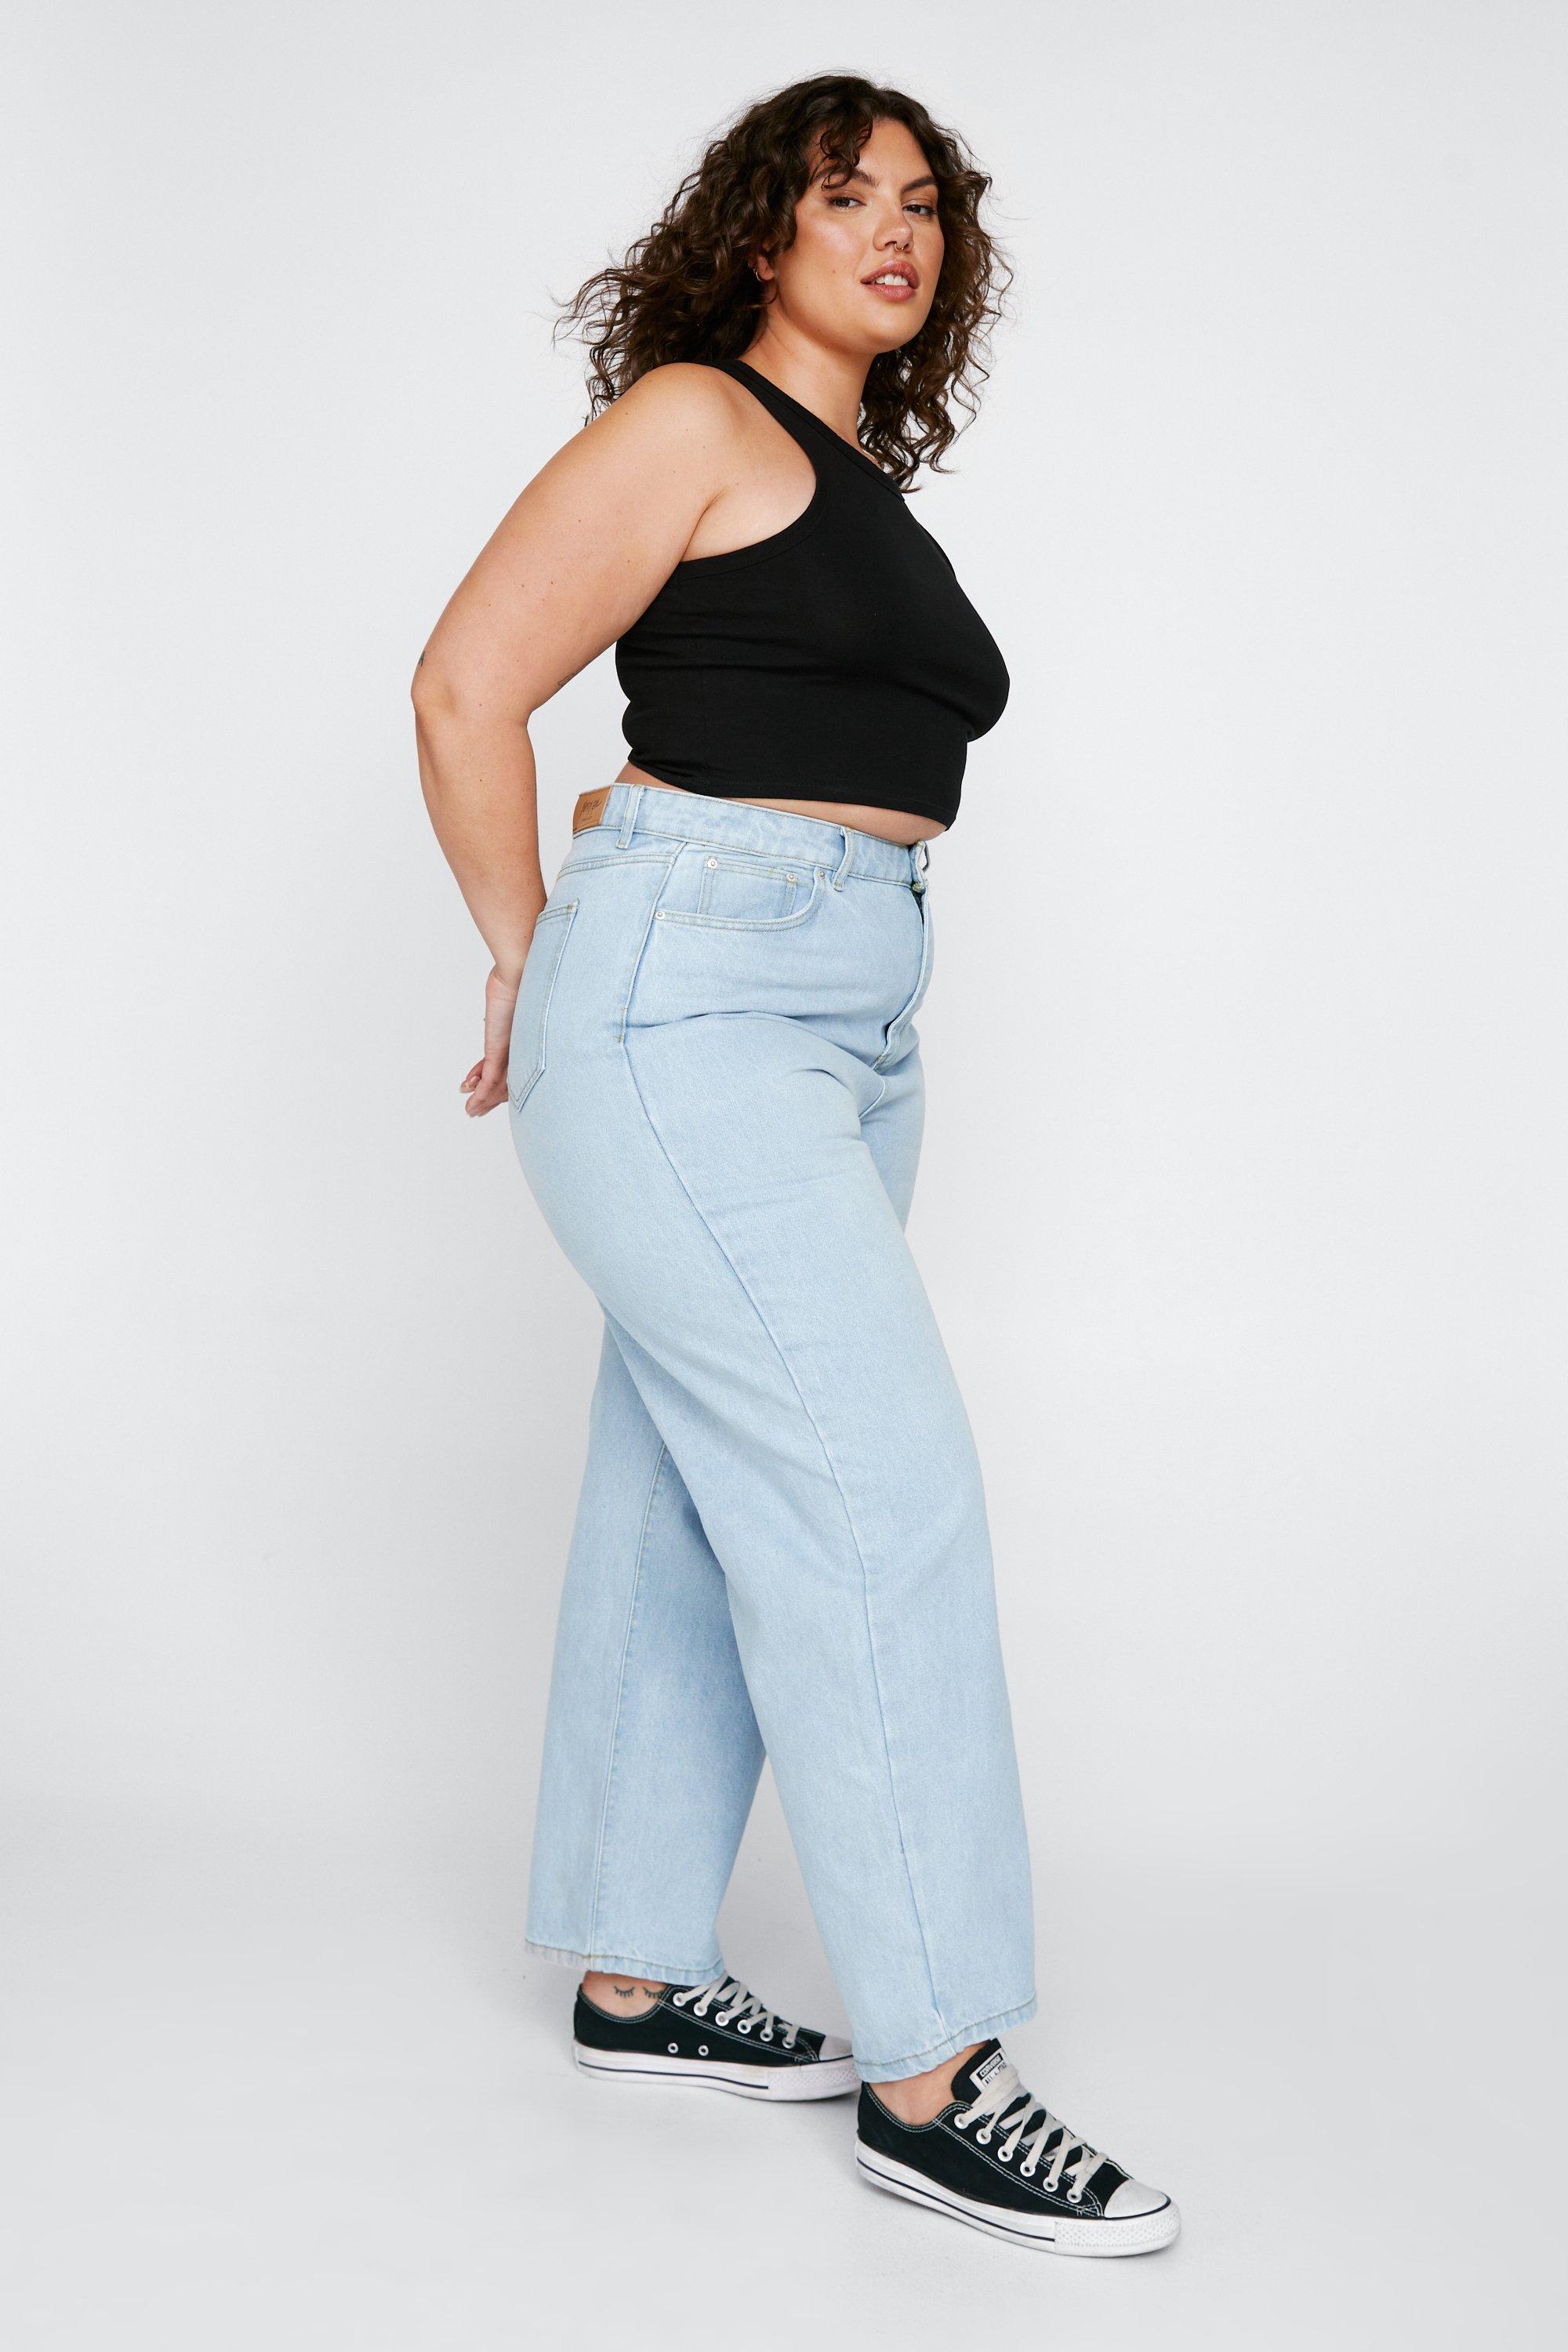 Plus Solid Rolled Hem Mom Jeans  Plus size mom jeans, Plus size outfits, Mom  jeans